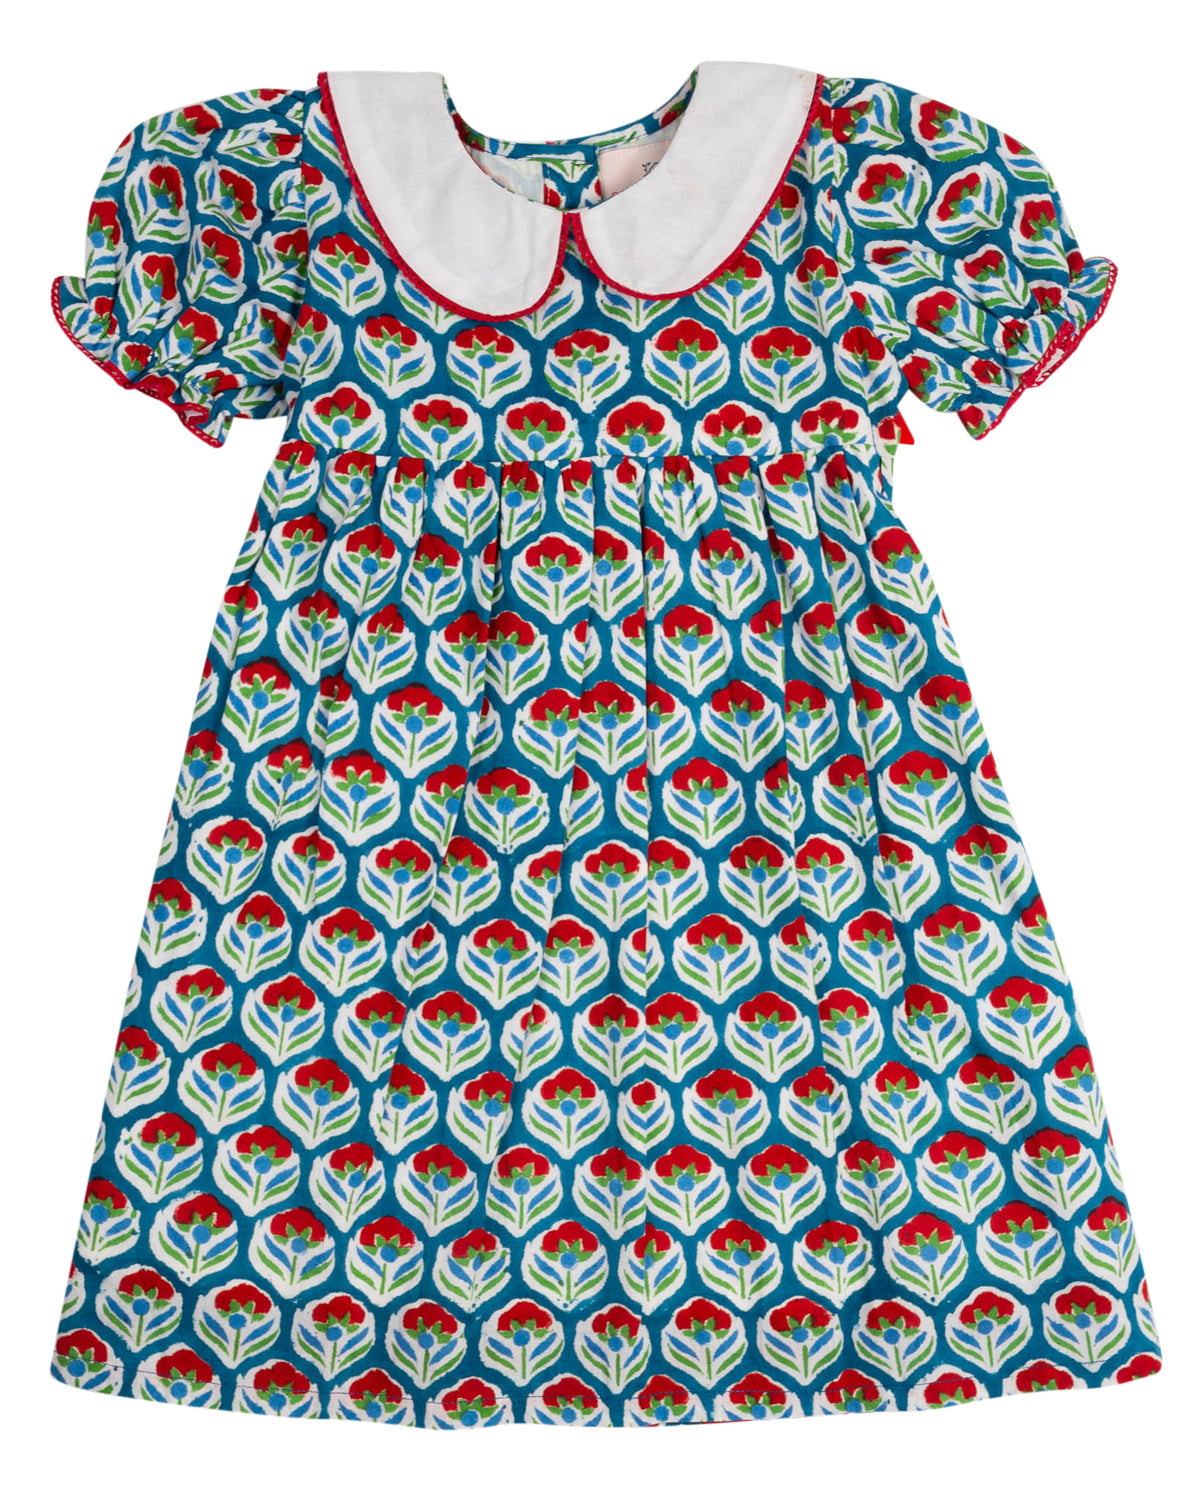 Blue and Red Block Print Dress